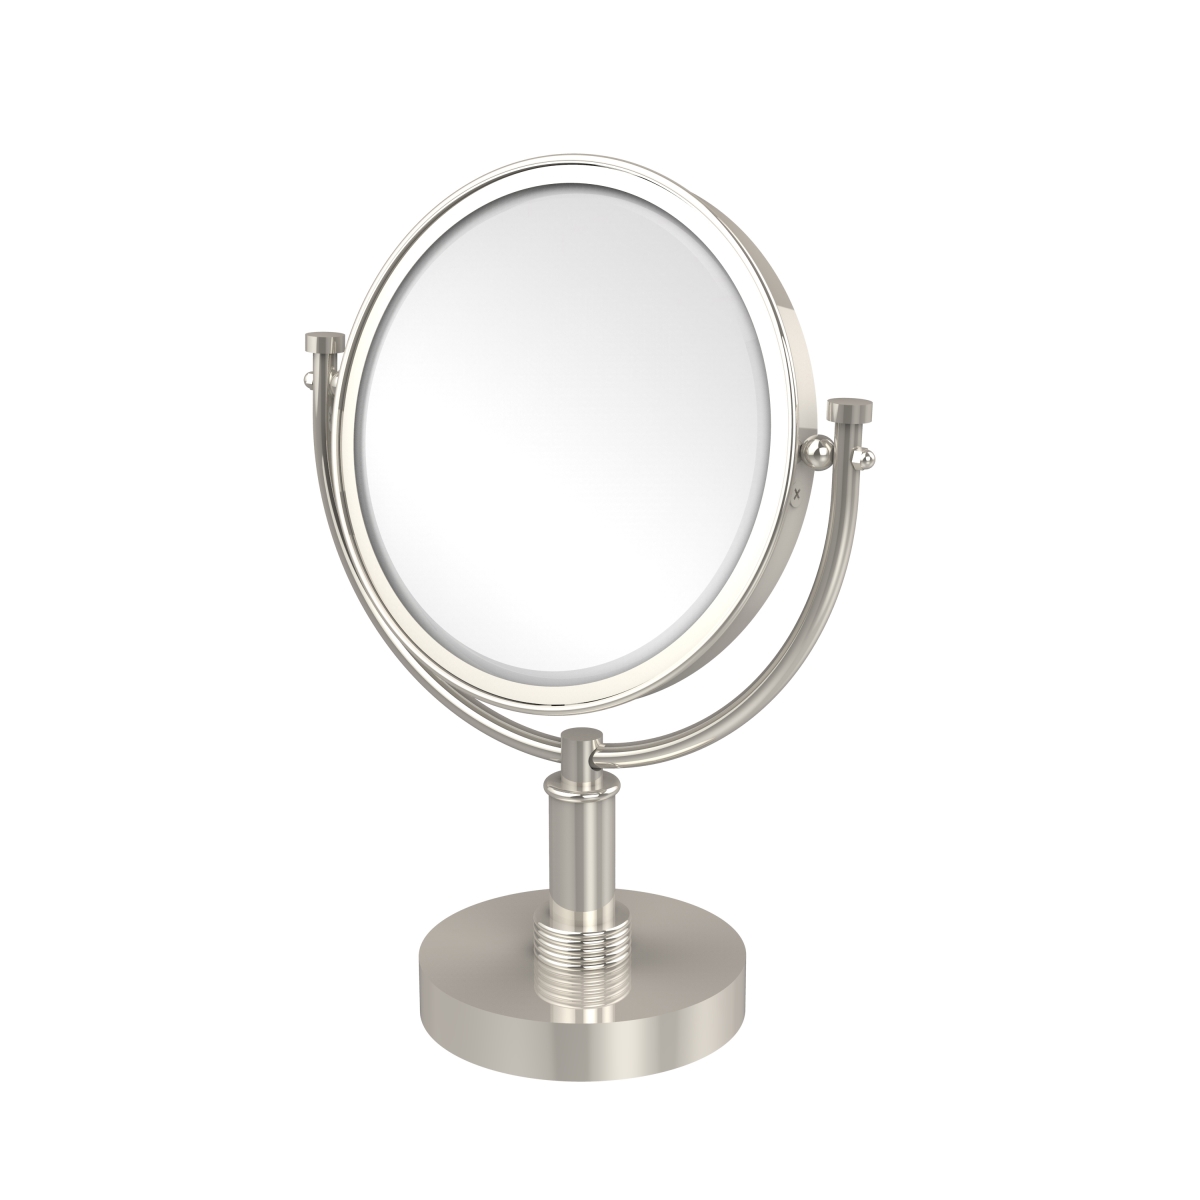 Picture of Allied Brass DM-4G-2X-PNI 8 in. Vanity Top Make-Up Mirror 2X Magnification, Polished Nickel - 15 x 8 x 8 in.